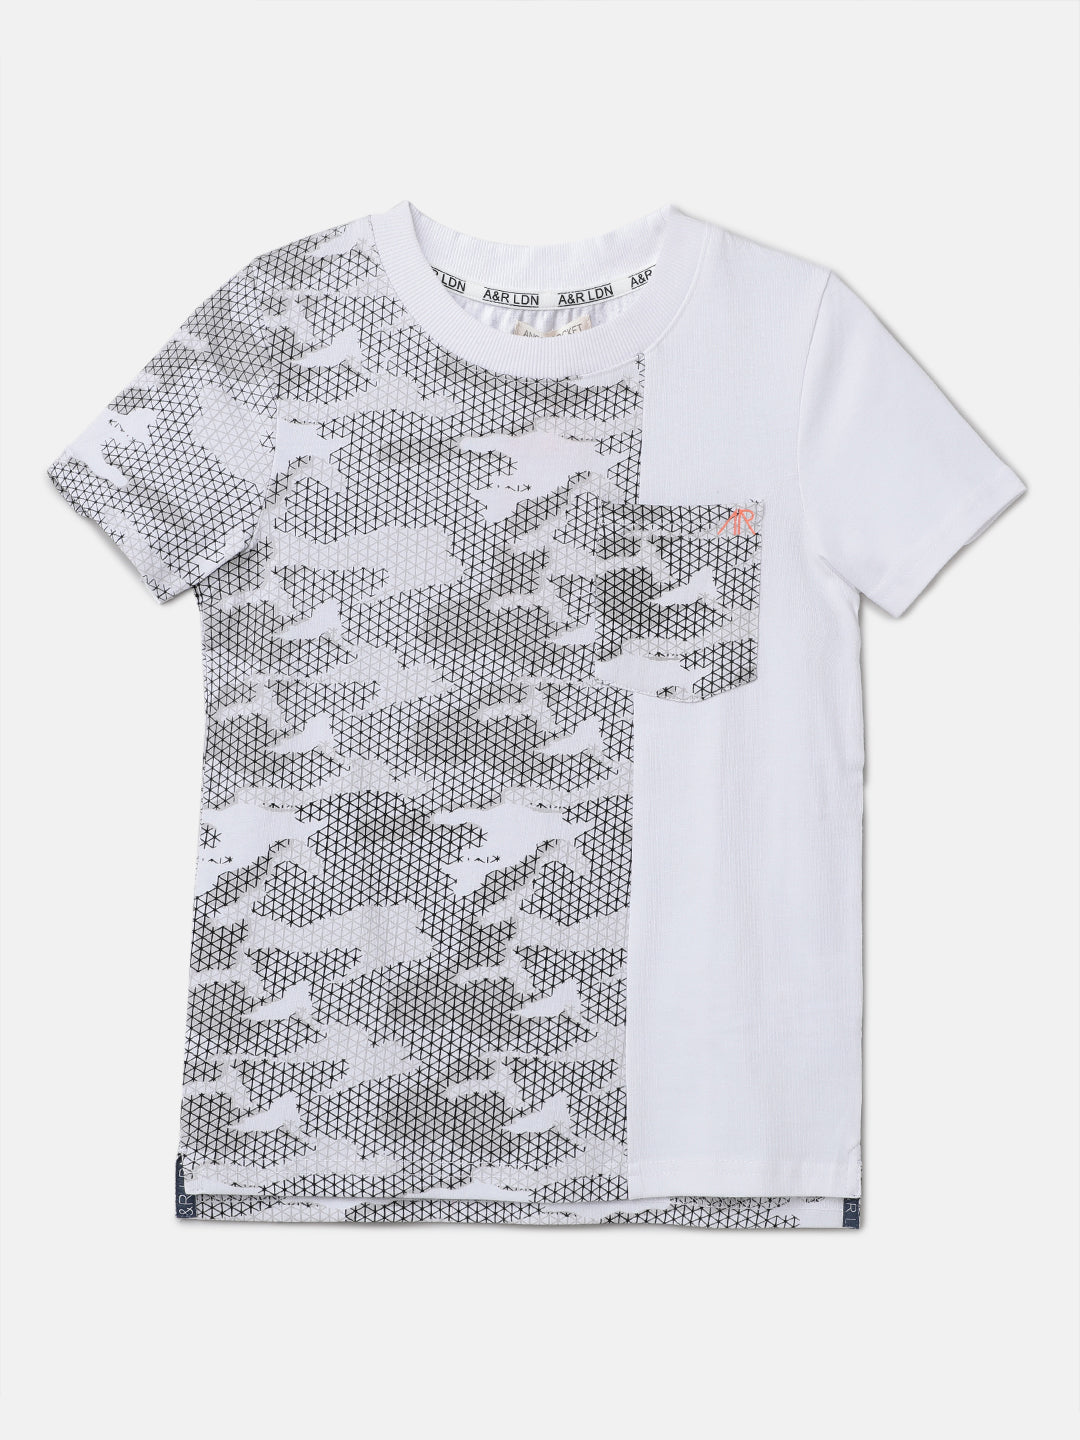 Boys White Colour Block Printed T-Shirt with Pocket